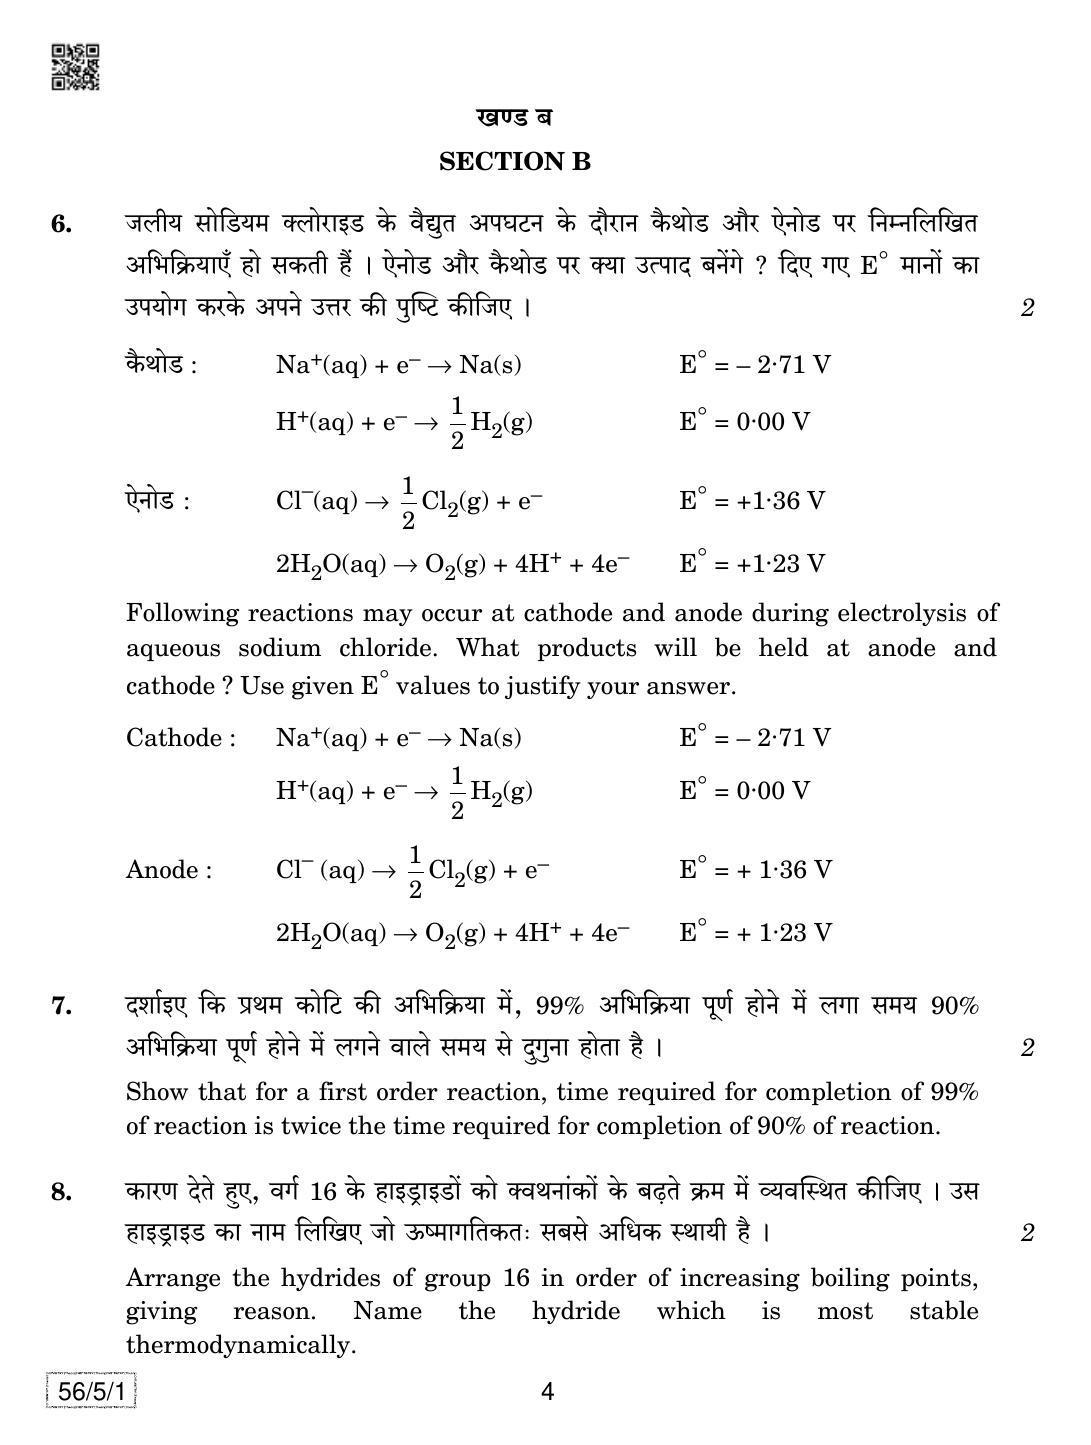 CBSE Class 12 56-5-1 Chemistry 2019 Question Paper - Page 4